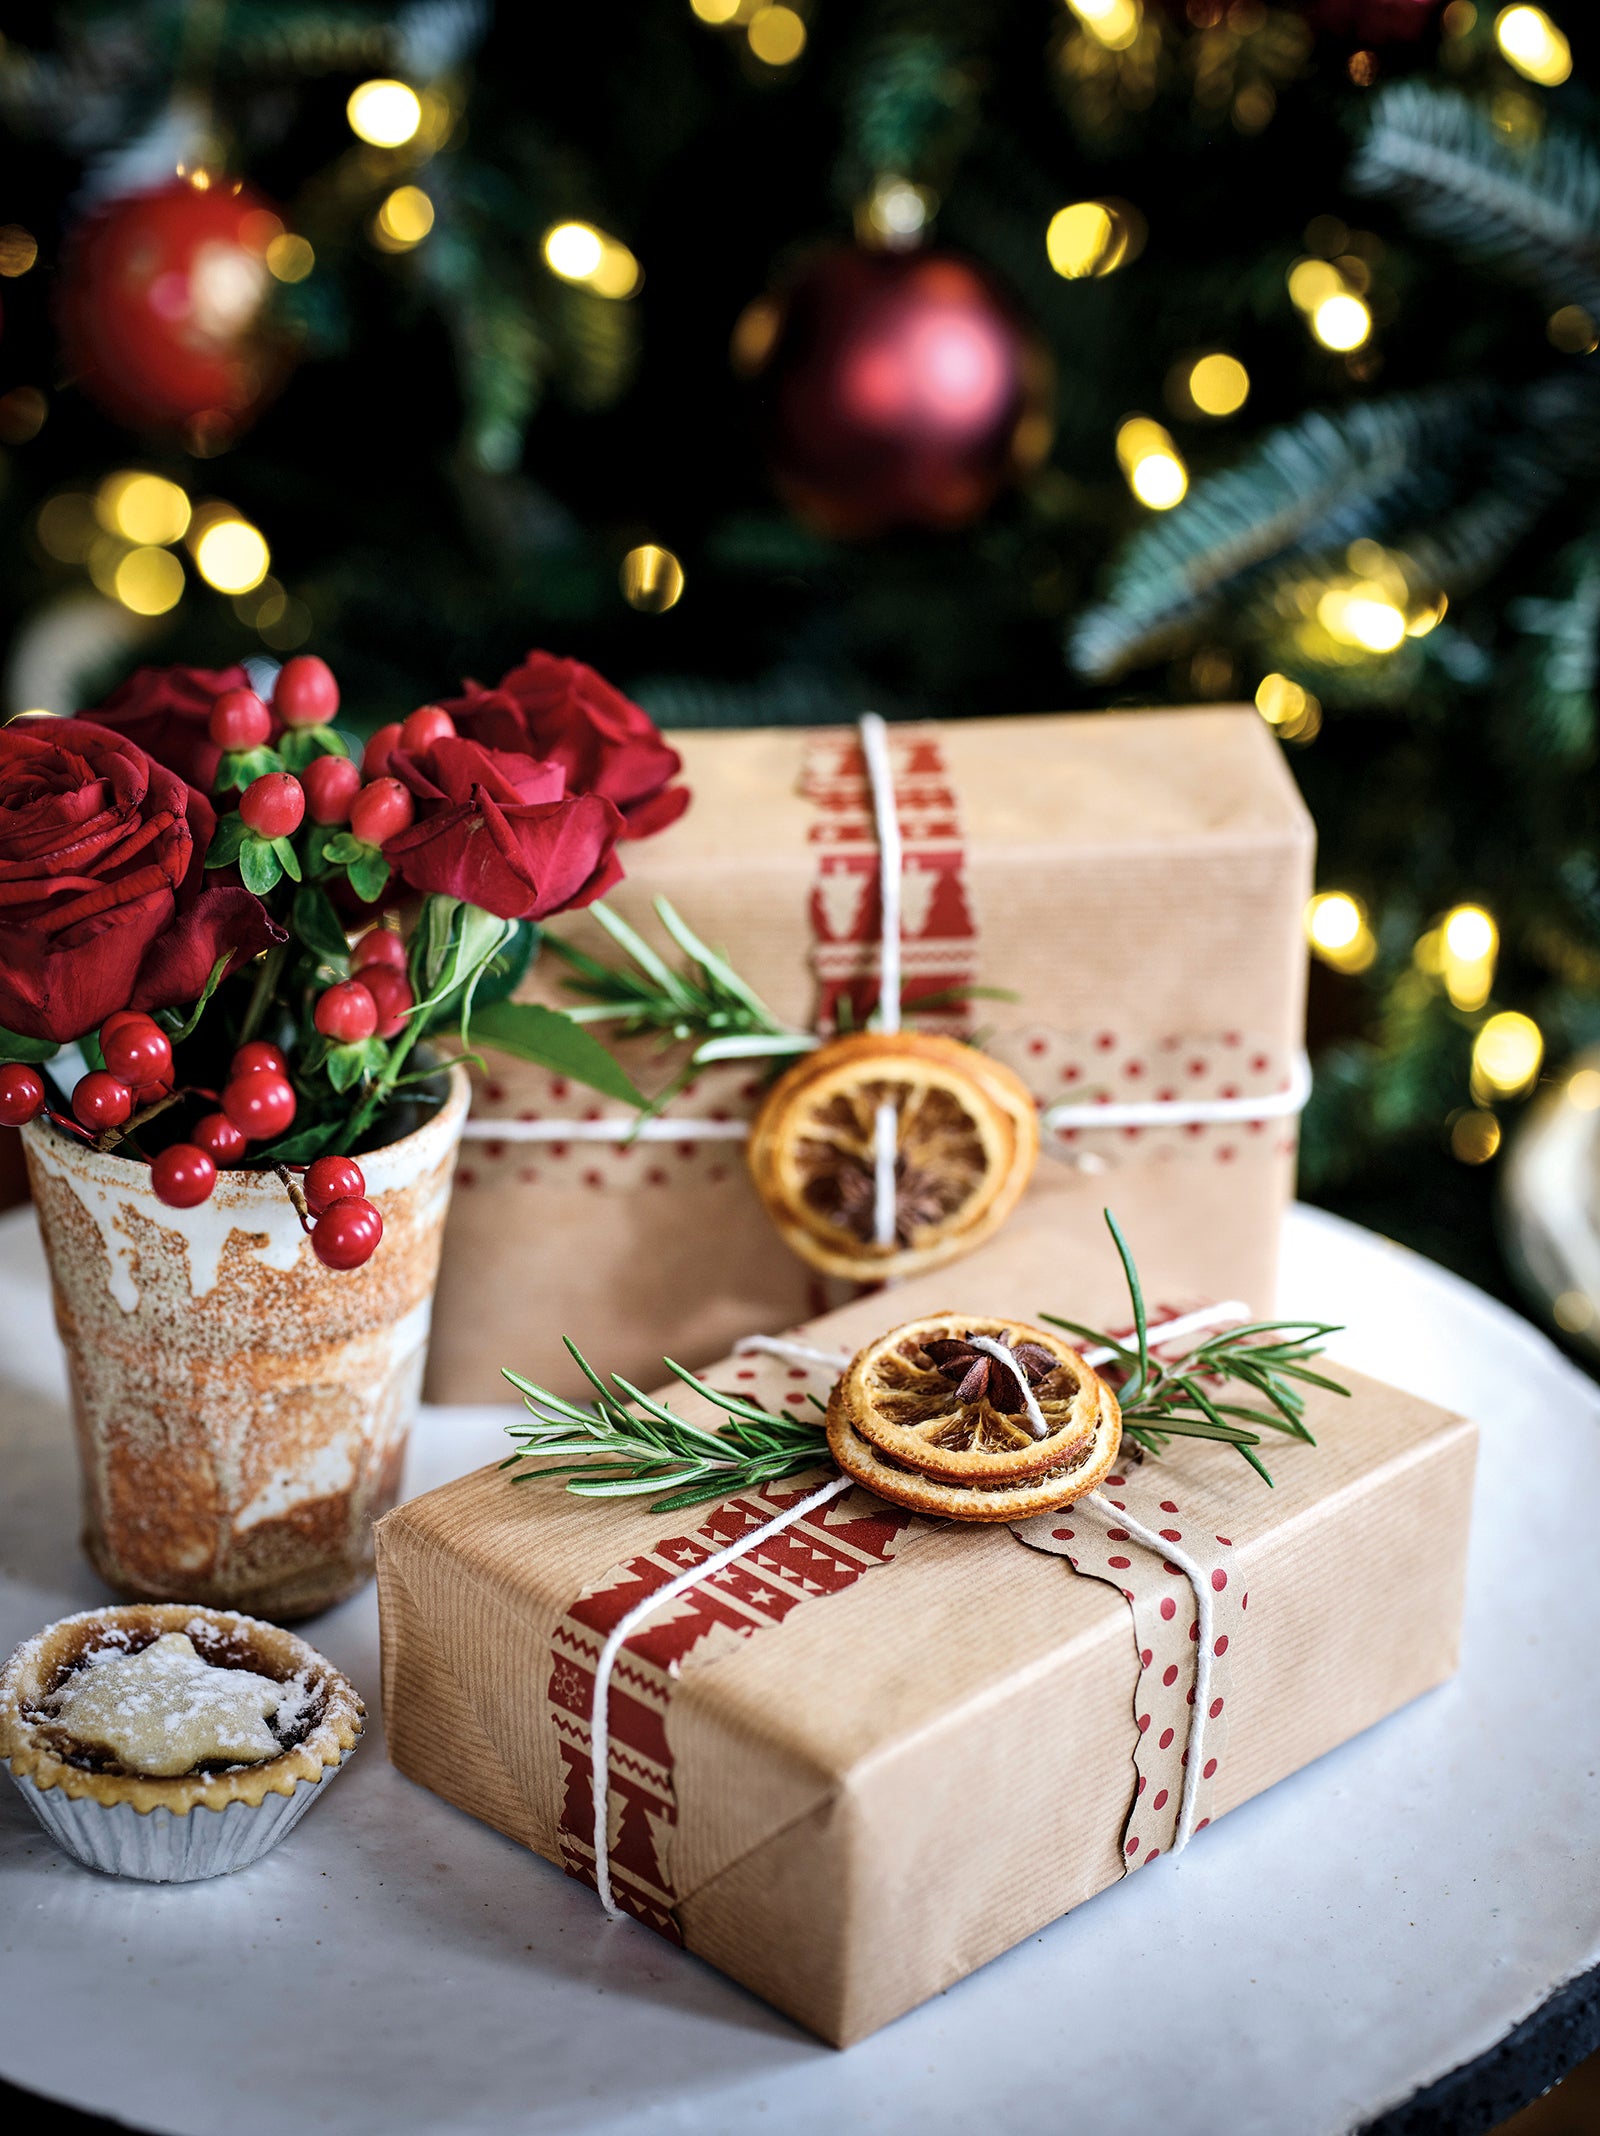 Gifts wrapped in brown paper and embellished with citrus fruit slices and rosemary